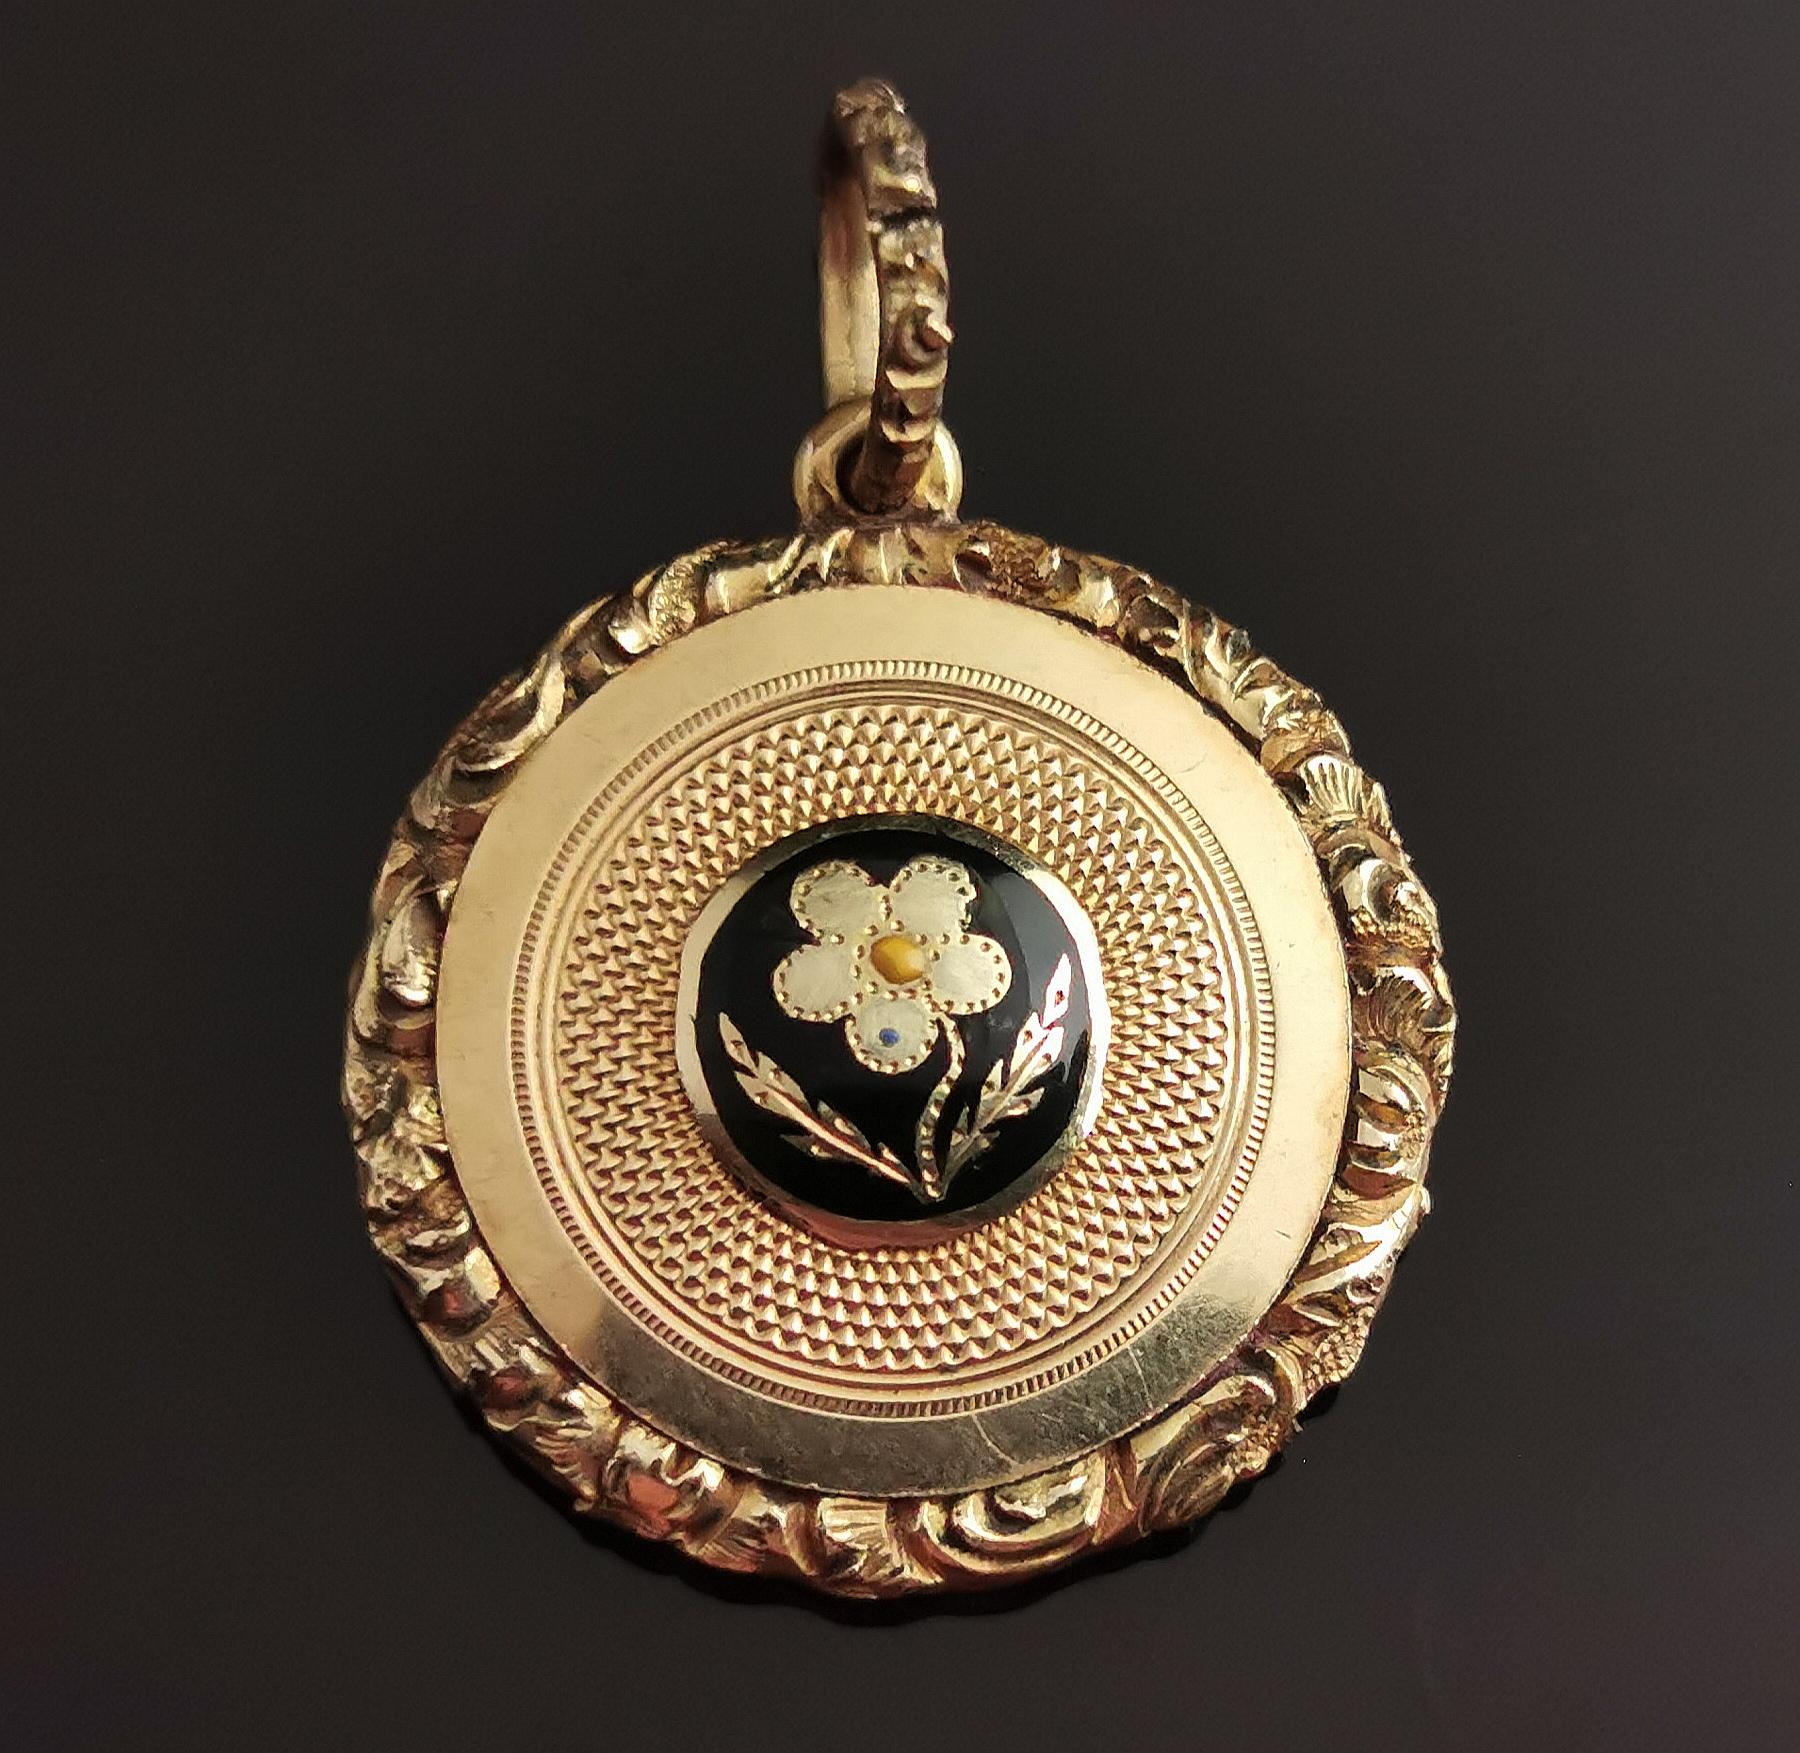 A beautiful antique Regency era mourning locket pendant.

It has an elaborate chased and engraved frame and bale and a gold panel front with black enamel flower, the reverse has a glazed compartment containing a lock of light brown hair secured with